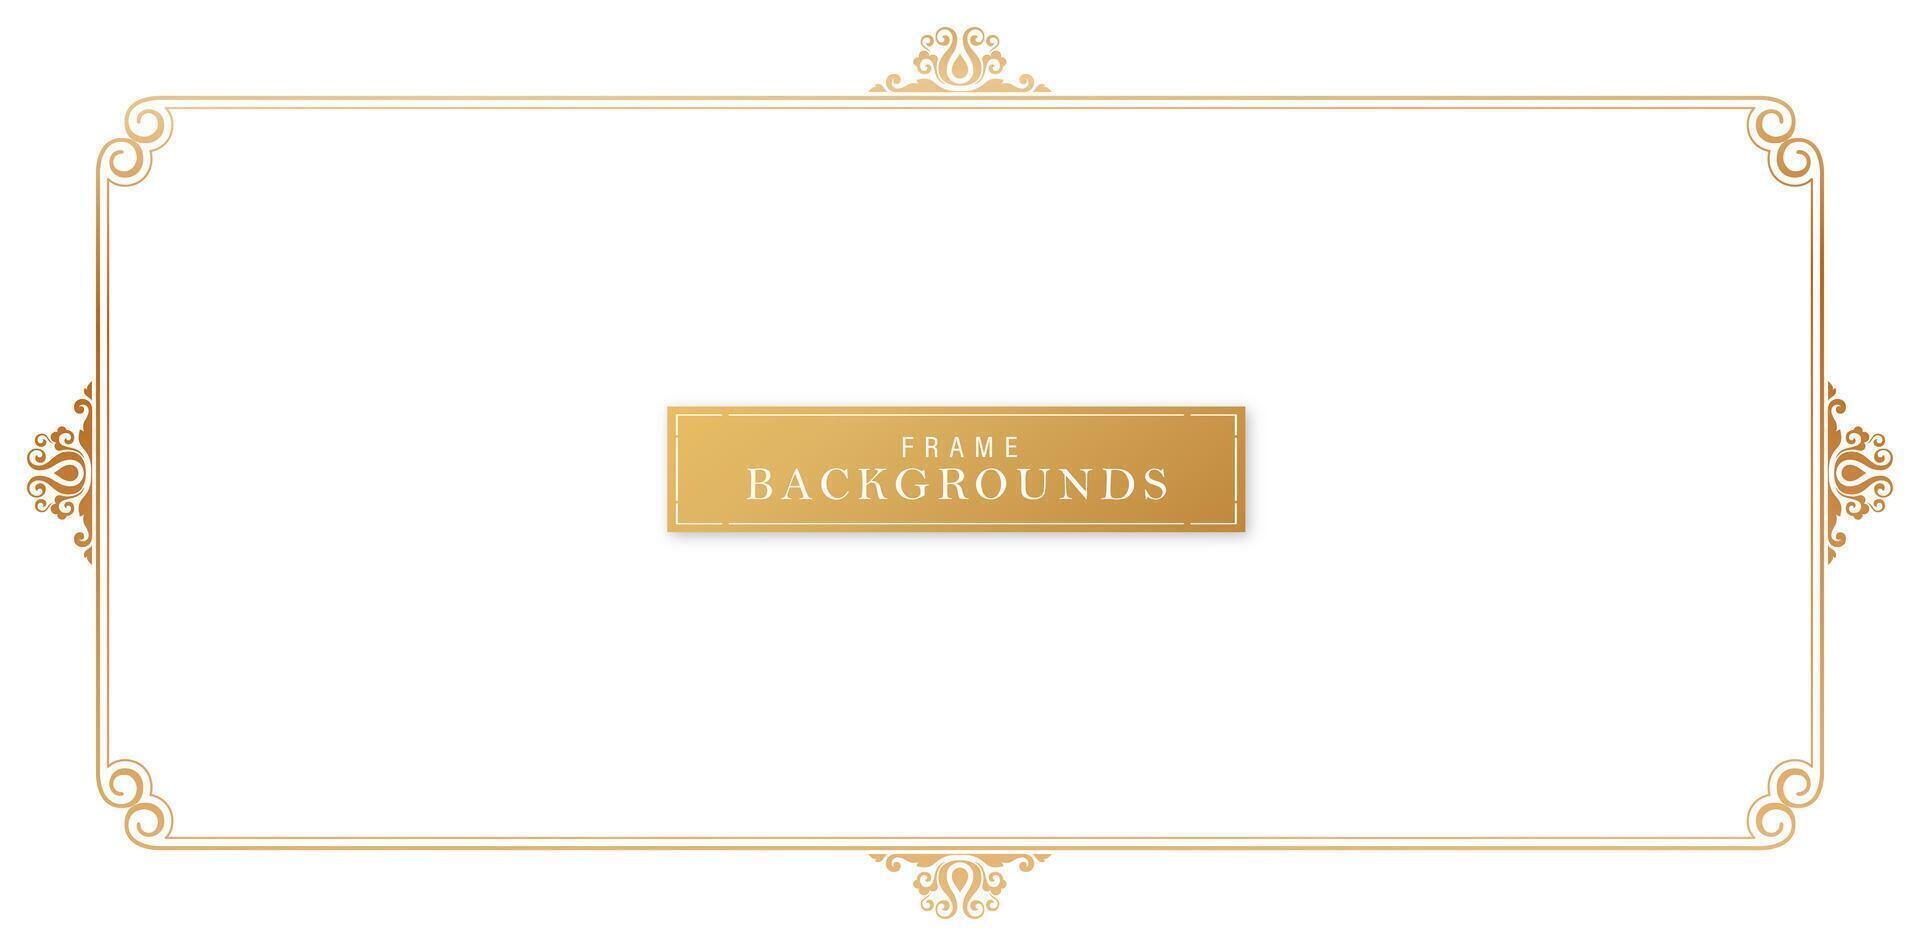 vintage golden frames with ornamental borders on a isolated white backgrounds for space text, luxury invitation, certificate of completion templates, stationery designs materials, collages decks vector